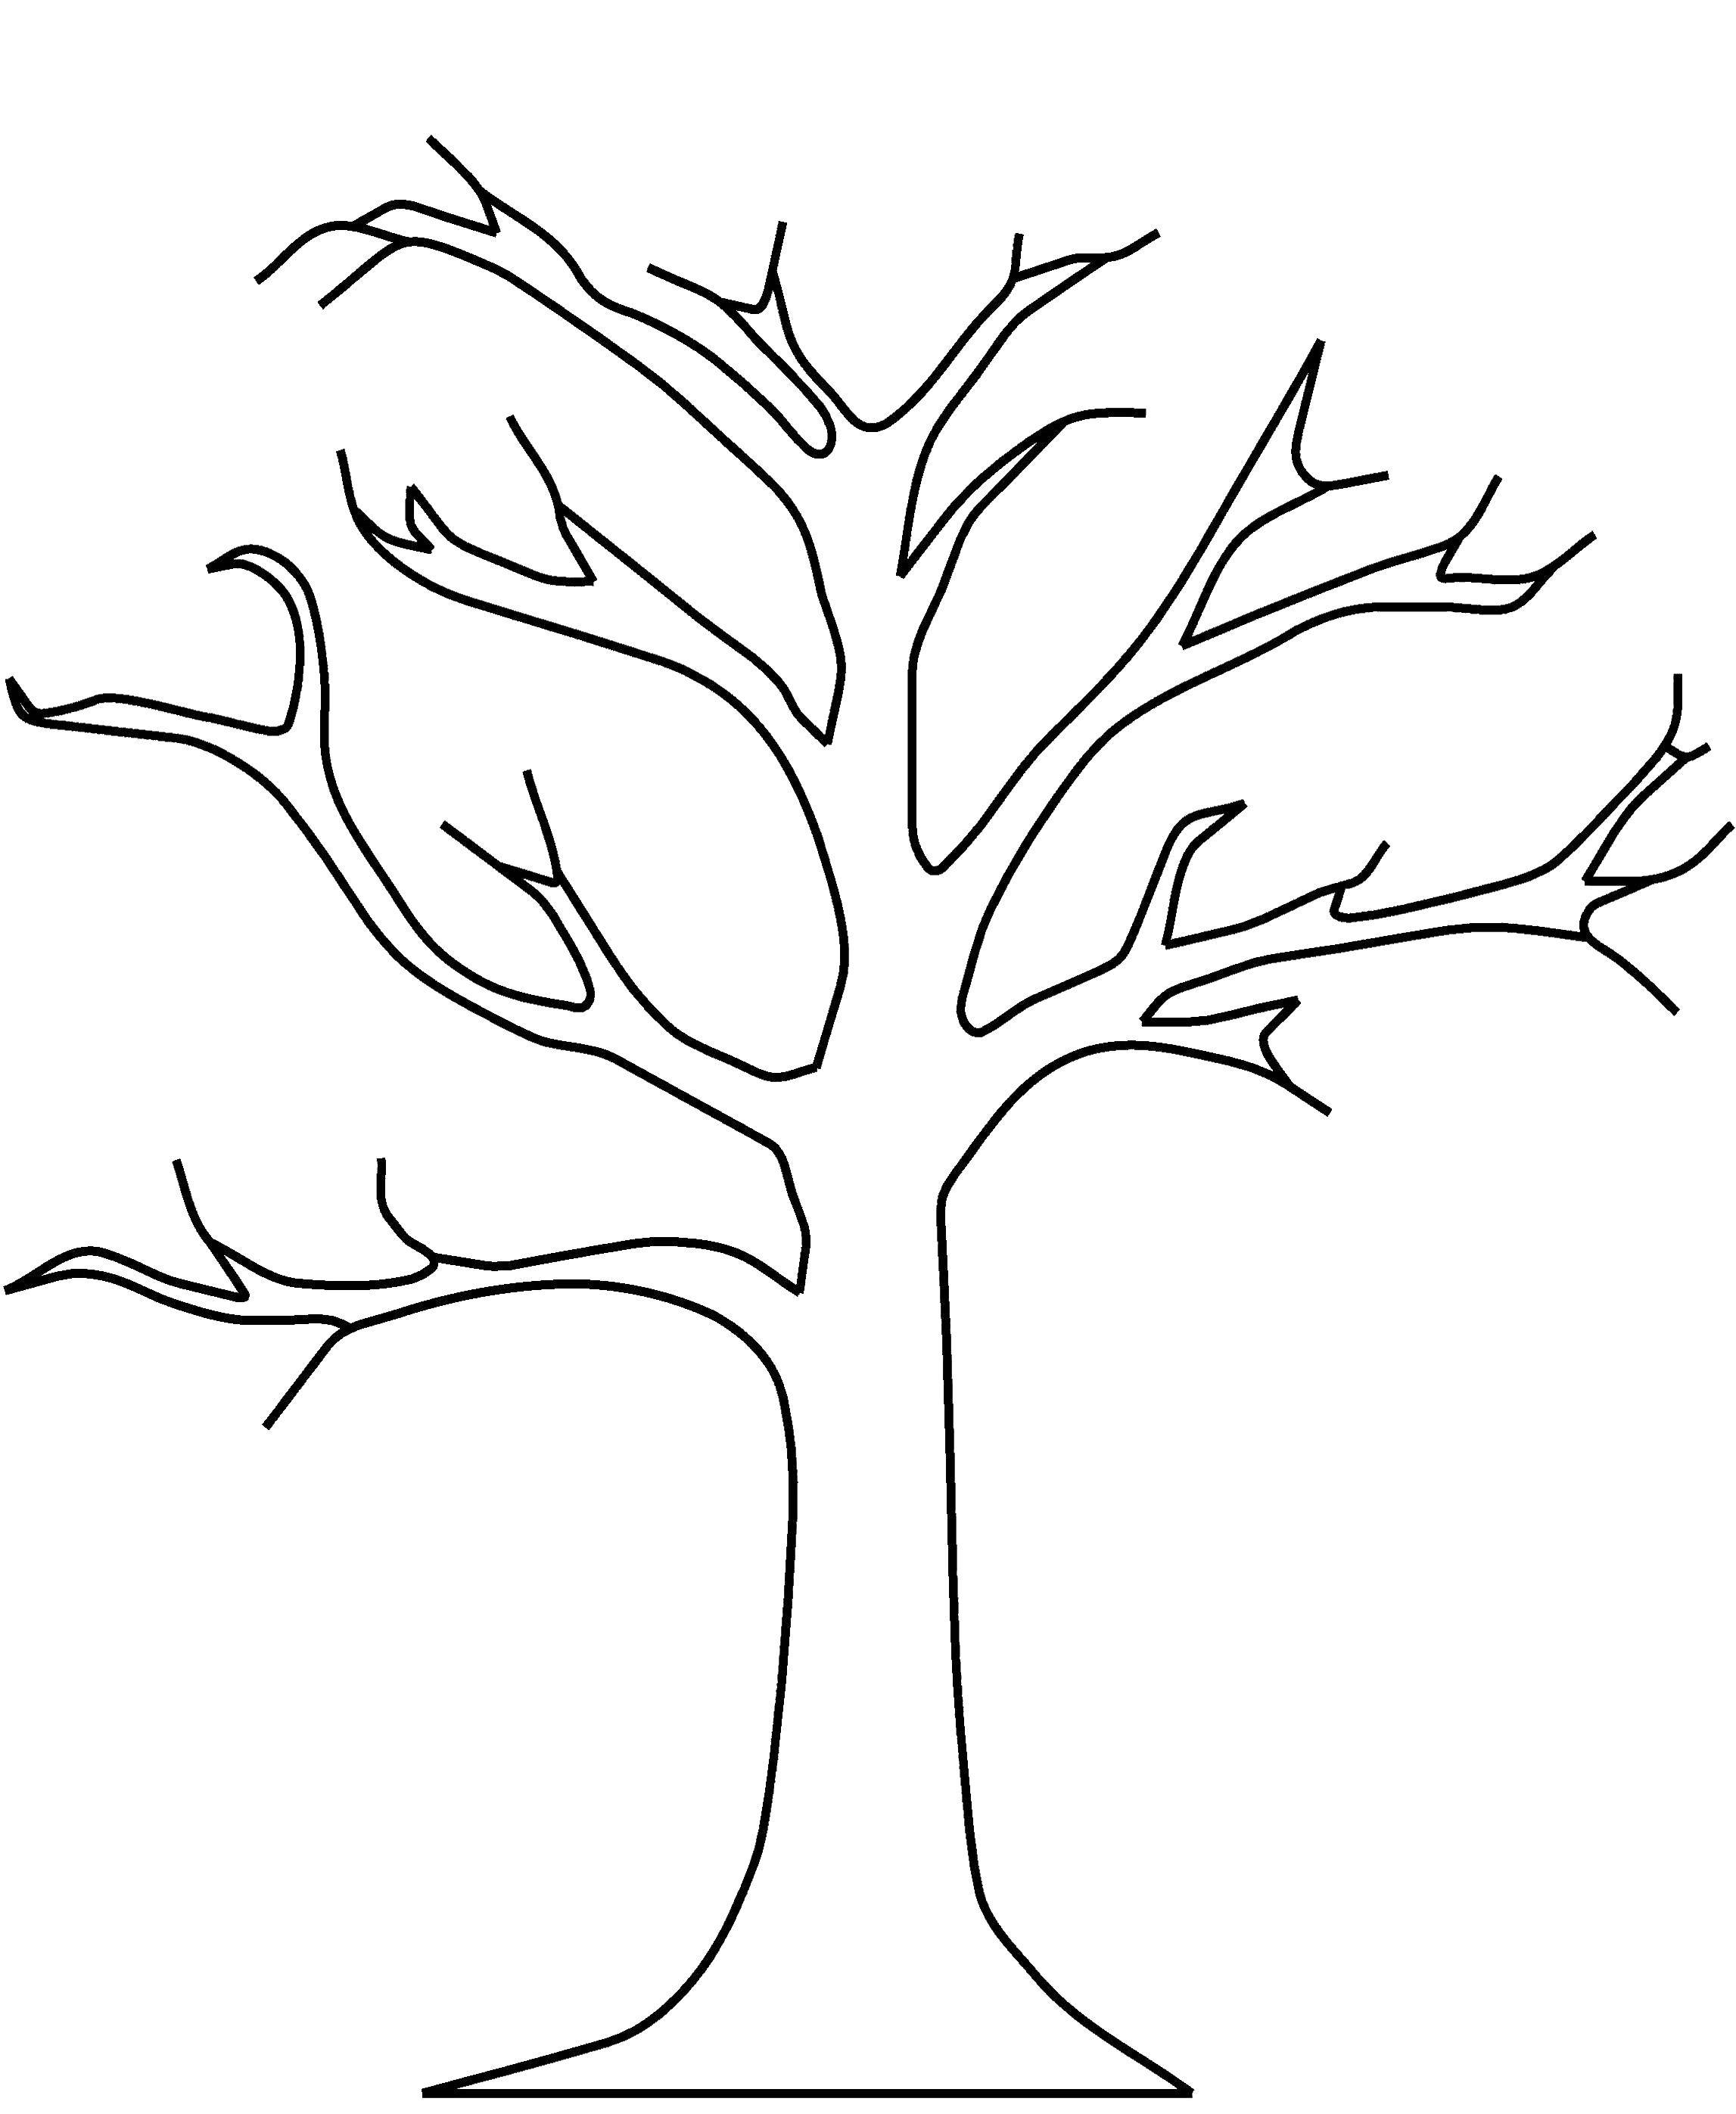 Coloring Bare branches. Category tree. Tags:  Trees, branches.